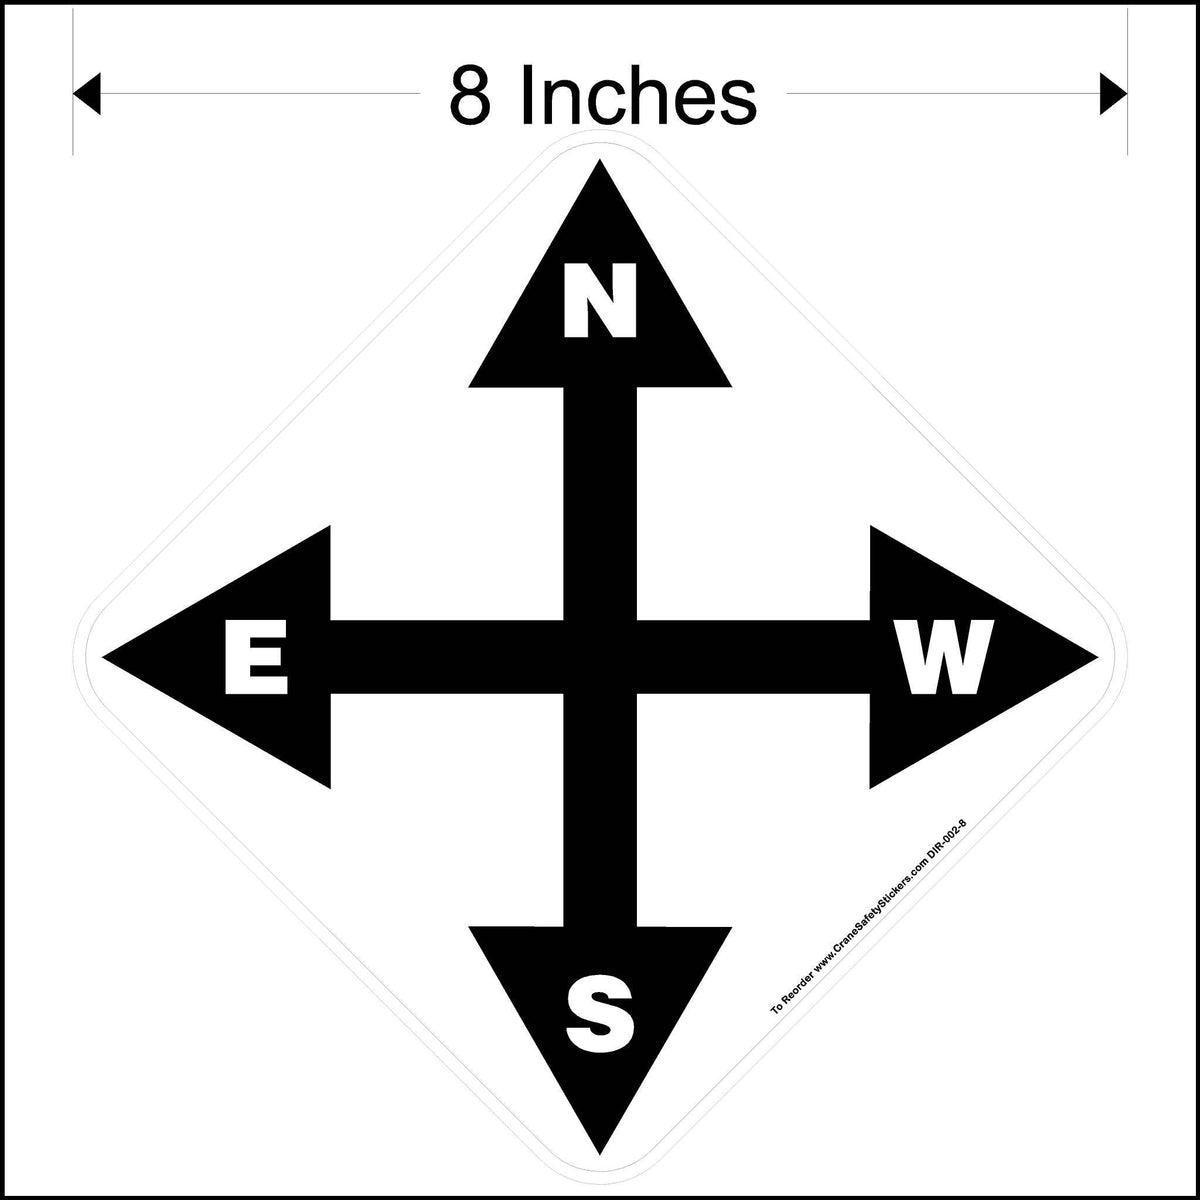 8 Inch North South West East Overhead Crane Directional Decal.